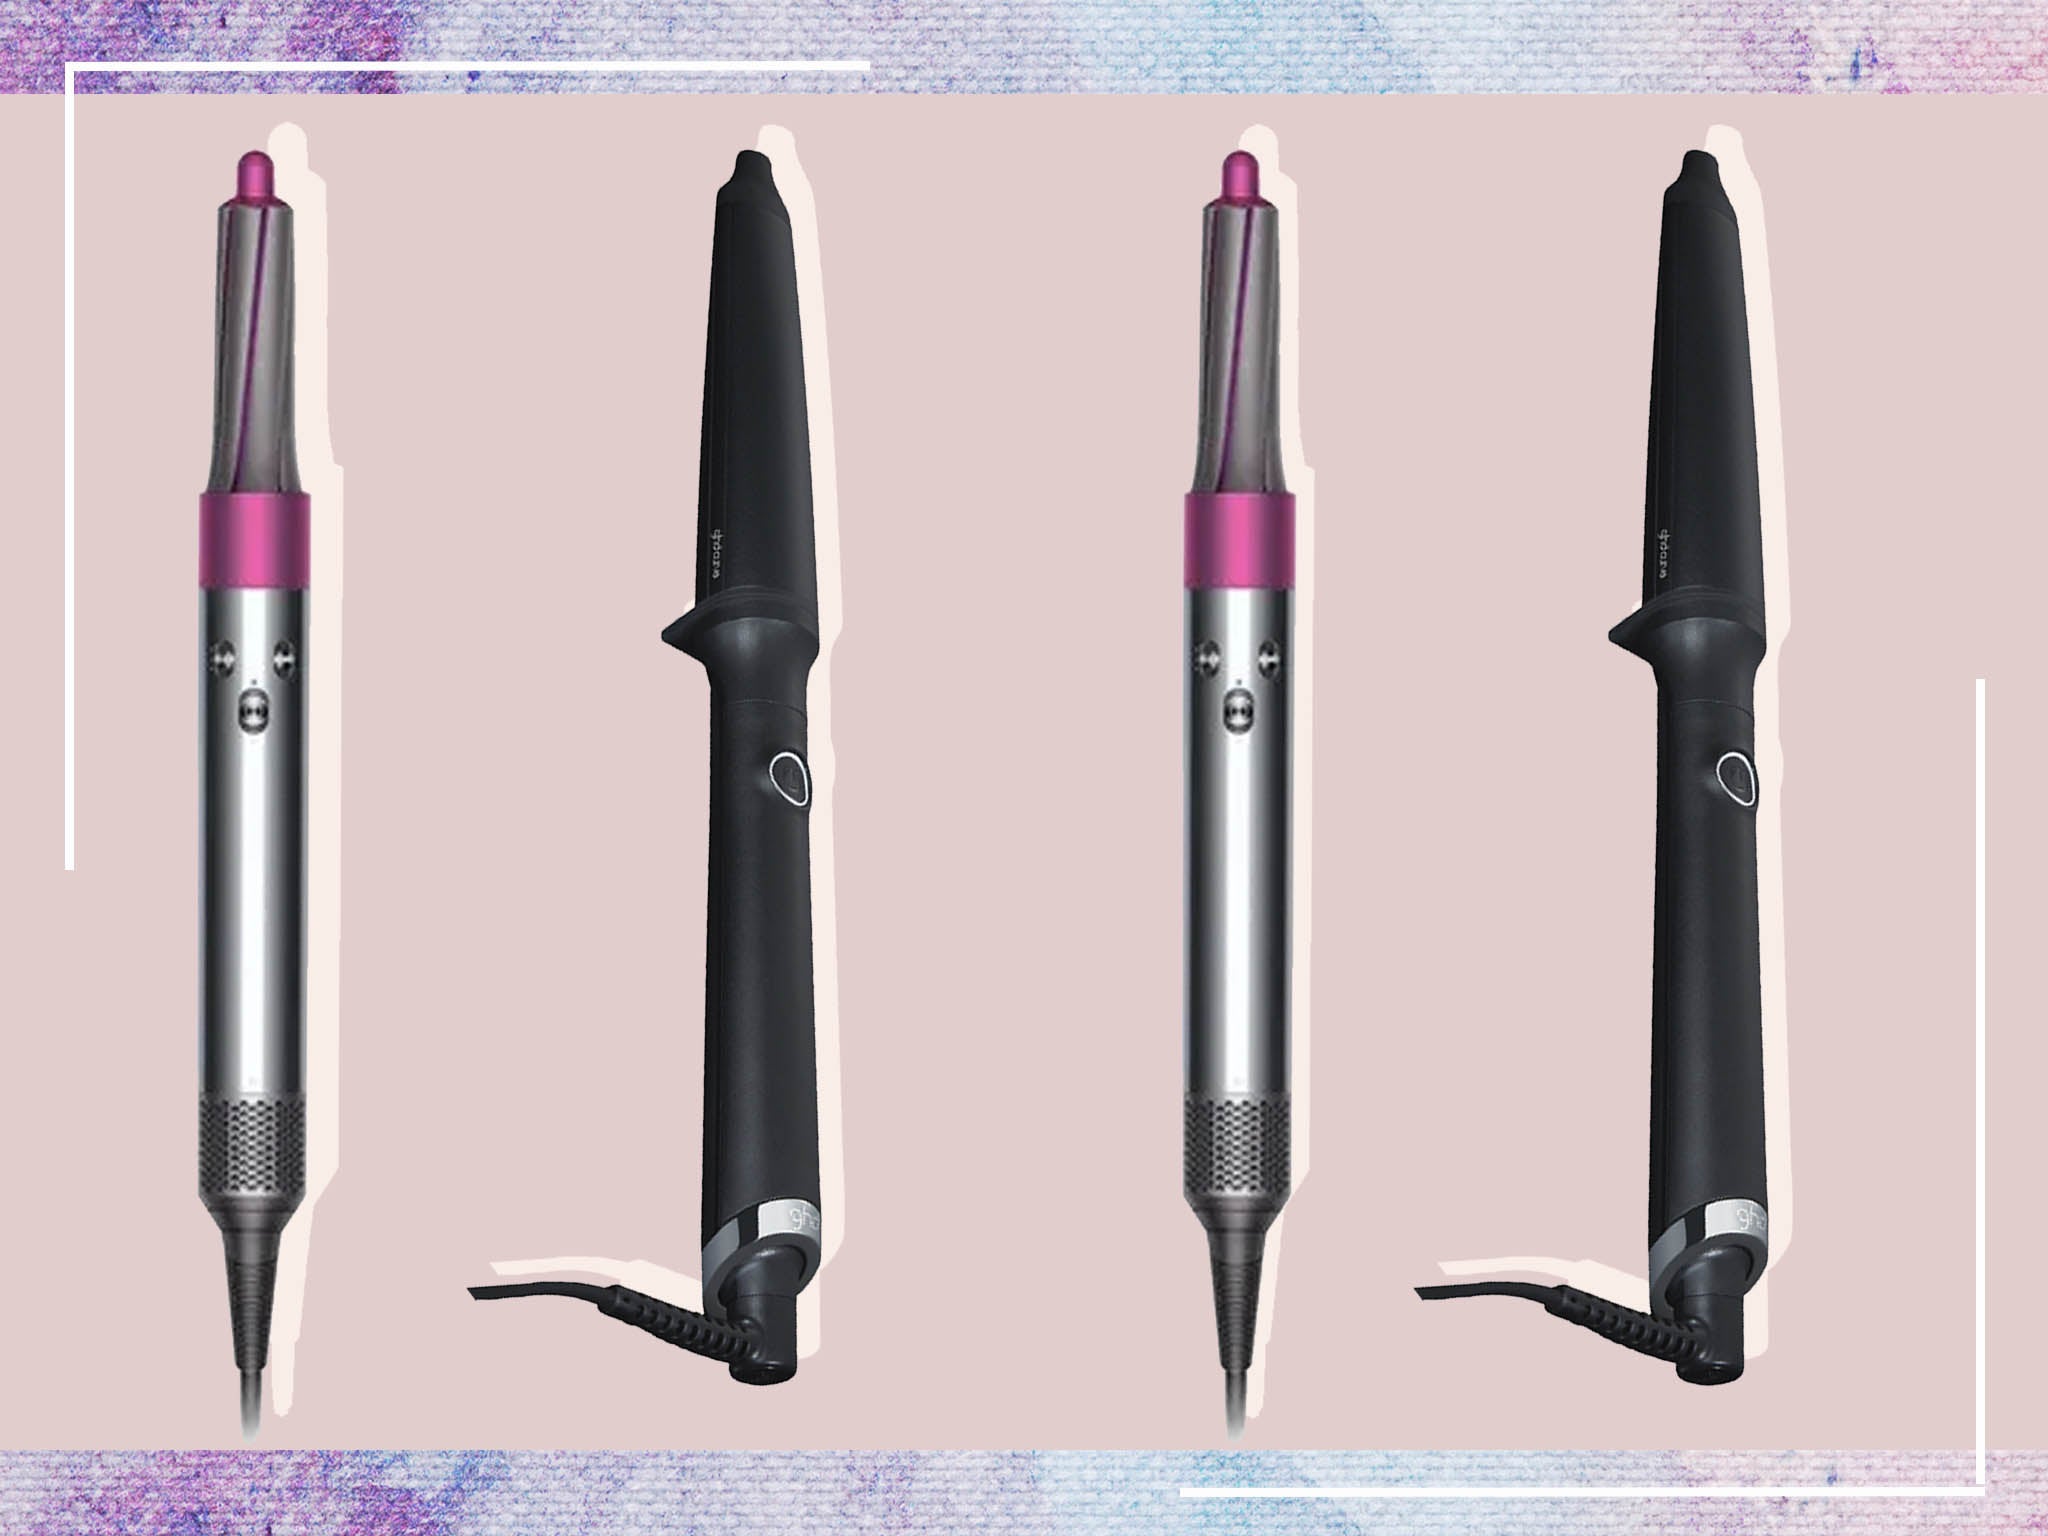 Dyson air wrap vs ghd creative curl wand review: Which is best